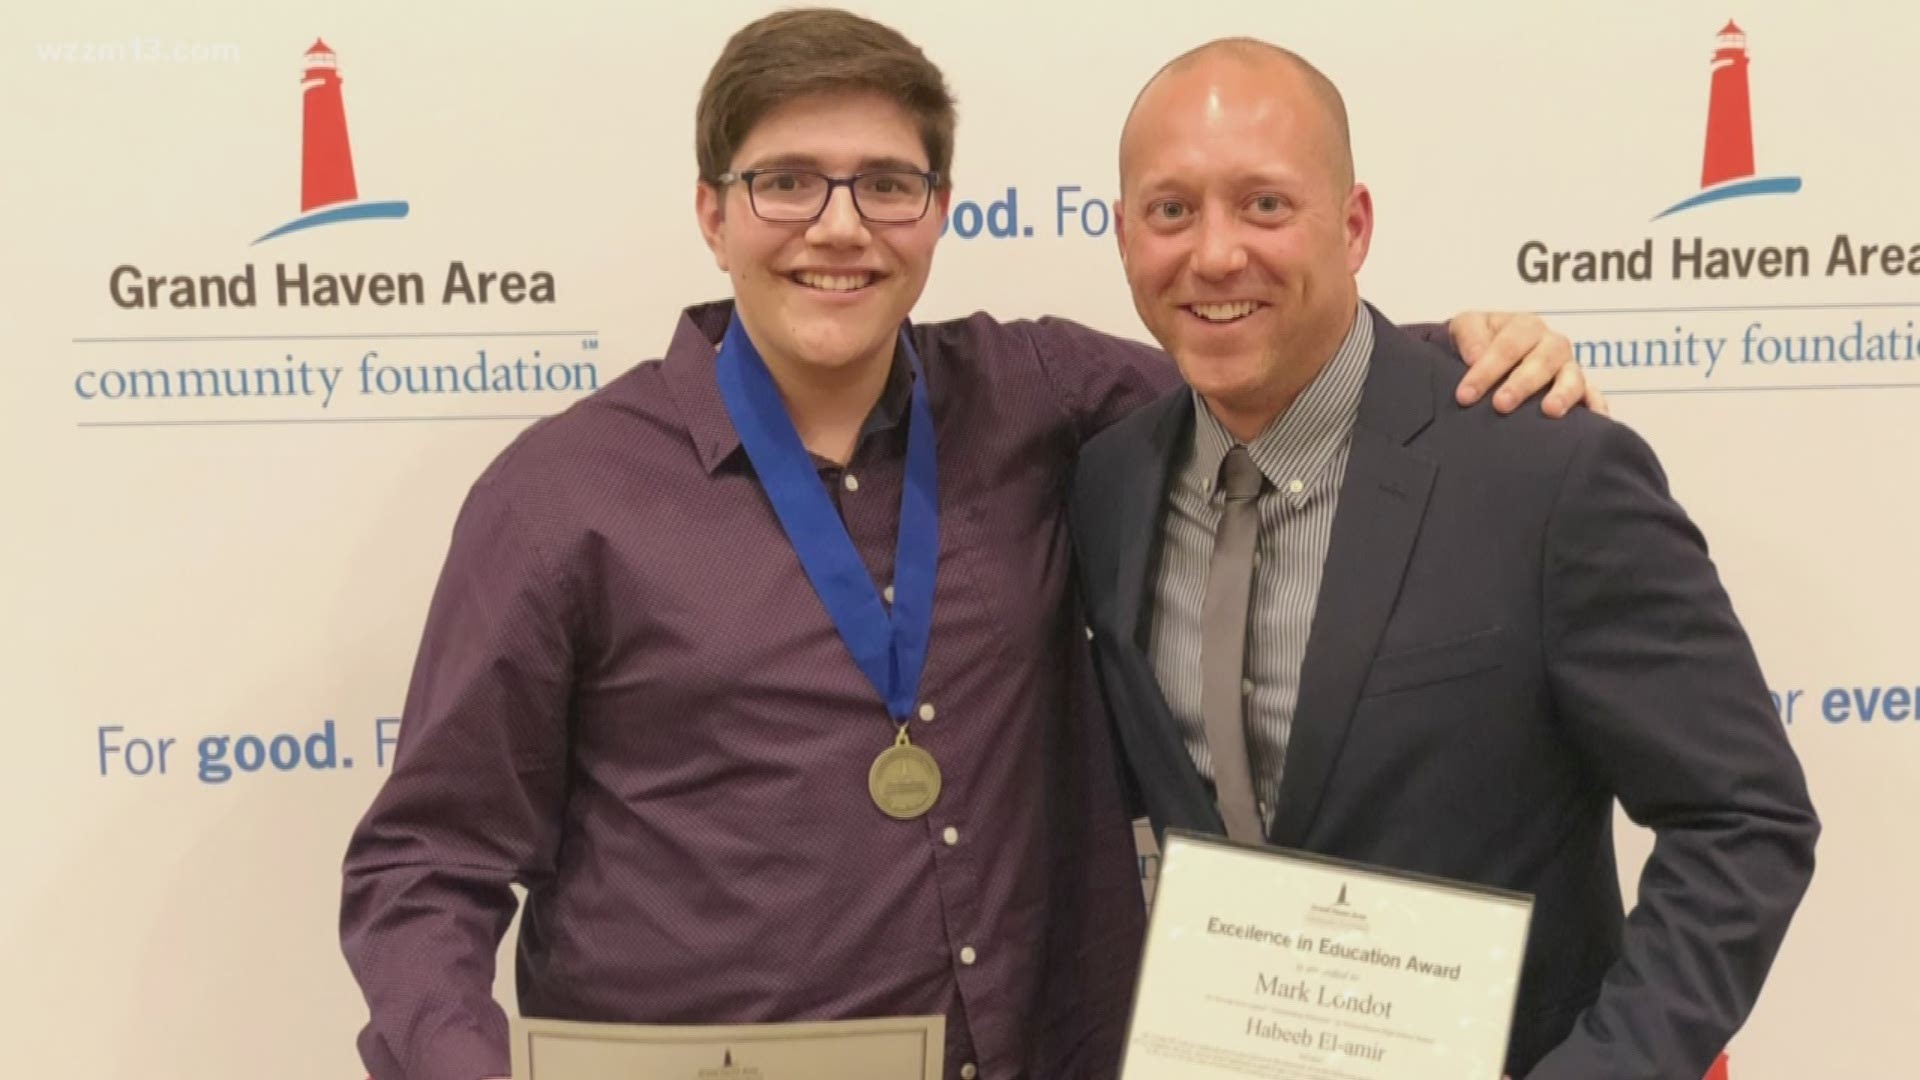 The Grand Haven Area Community Foundation hosted their "Excellence in Education" program recently. The top 10% of high school seniors at Grand Haven, Spring Lake and Western Michigan Christian High Schools were invited to attend, along with the educator that most influenced their school career.